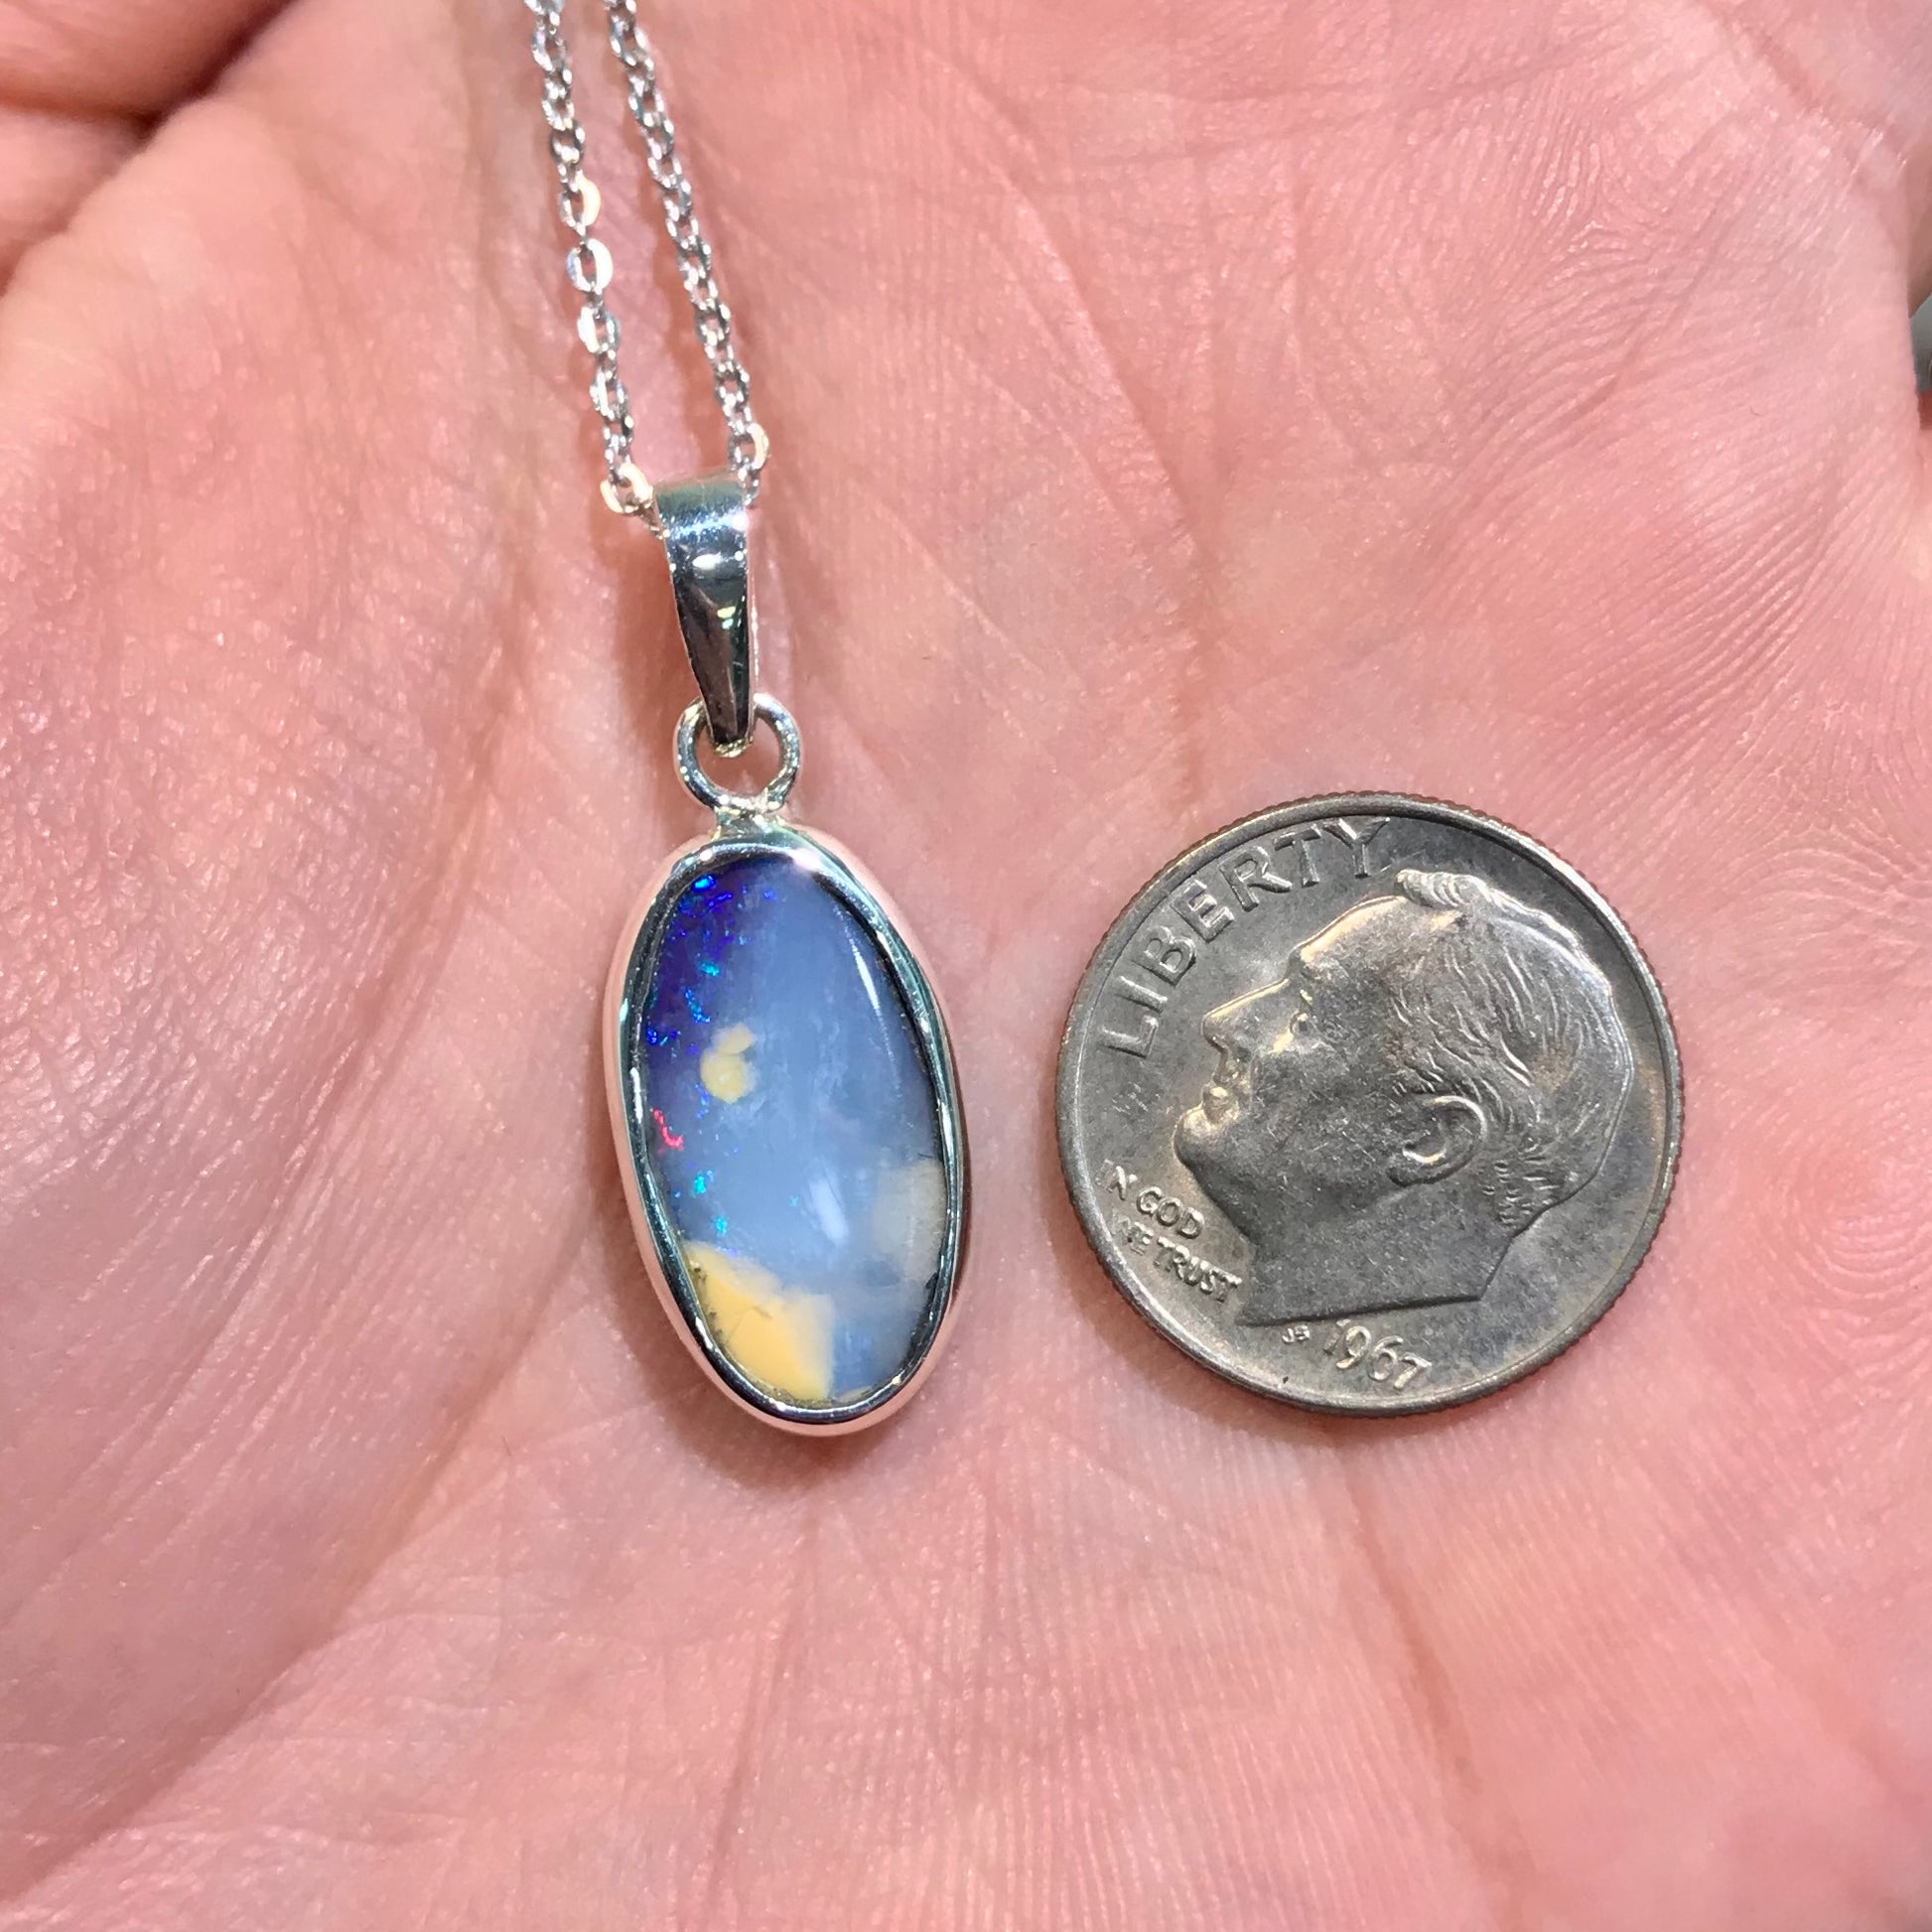 A photo of a Quilpie Australian blue boulder opal with tan matrix set into a sterling silver bezel pendant.  The opal resembles a beach with tan sand matrix and a blue ocean of color.  A red flash can be seen in the blue.  The pendant is in someone's hand being compared to a 1967 dime.